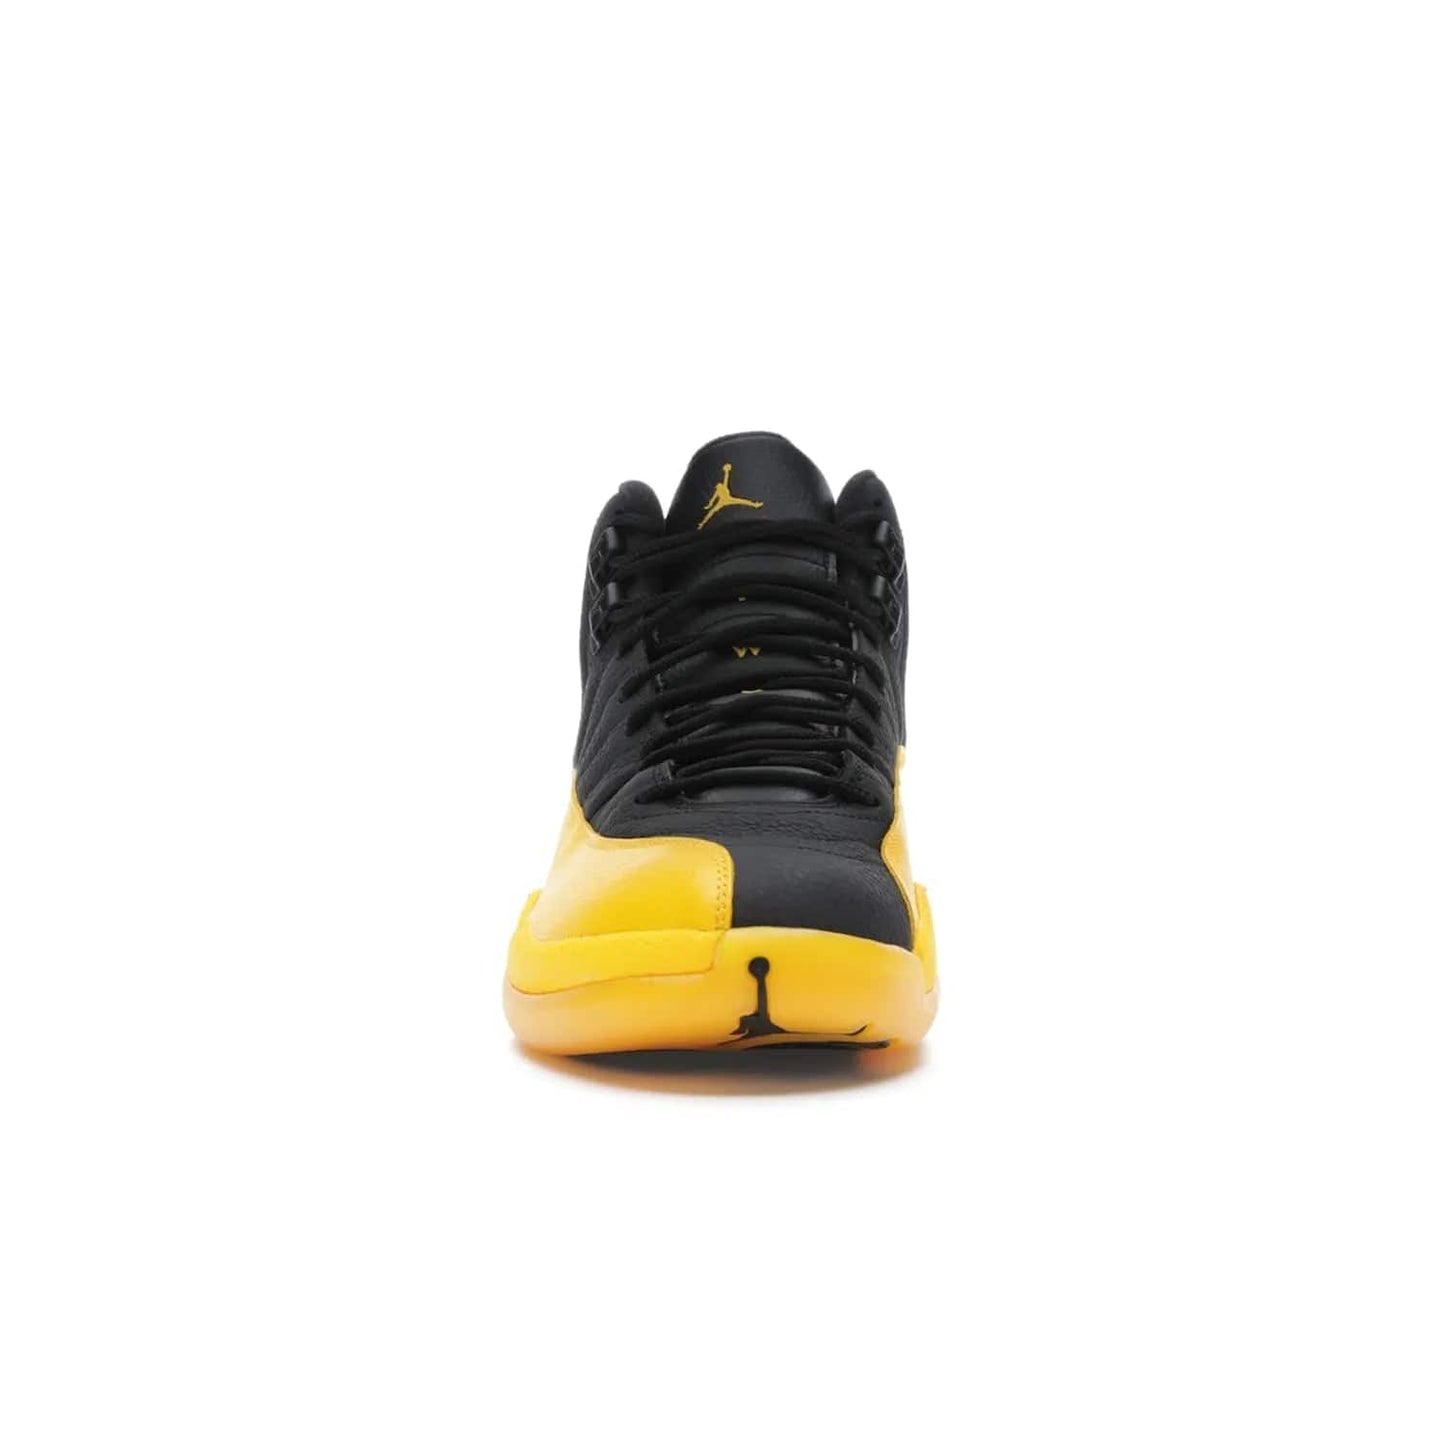 Jordan 12 Retro Black University Gold - Image 10 - Only at www.BallersClubKickz.com - This Jordan 12 Retro features a black tumbled leather upper and University Gold accents for a modern twist. Boasting Jordan "Two Three" branding and a yellow sole, these shoes will elevate your wardrobe. Fresh, sleek, and one of a kind - the Jordan 12 University Gold is your summer sneaker.